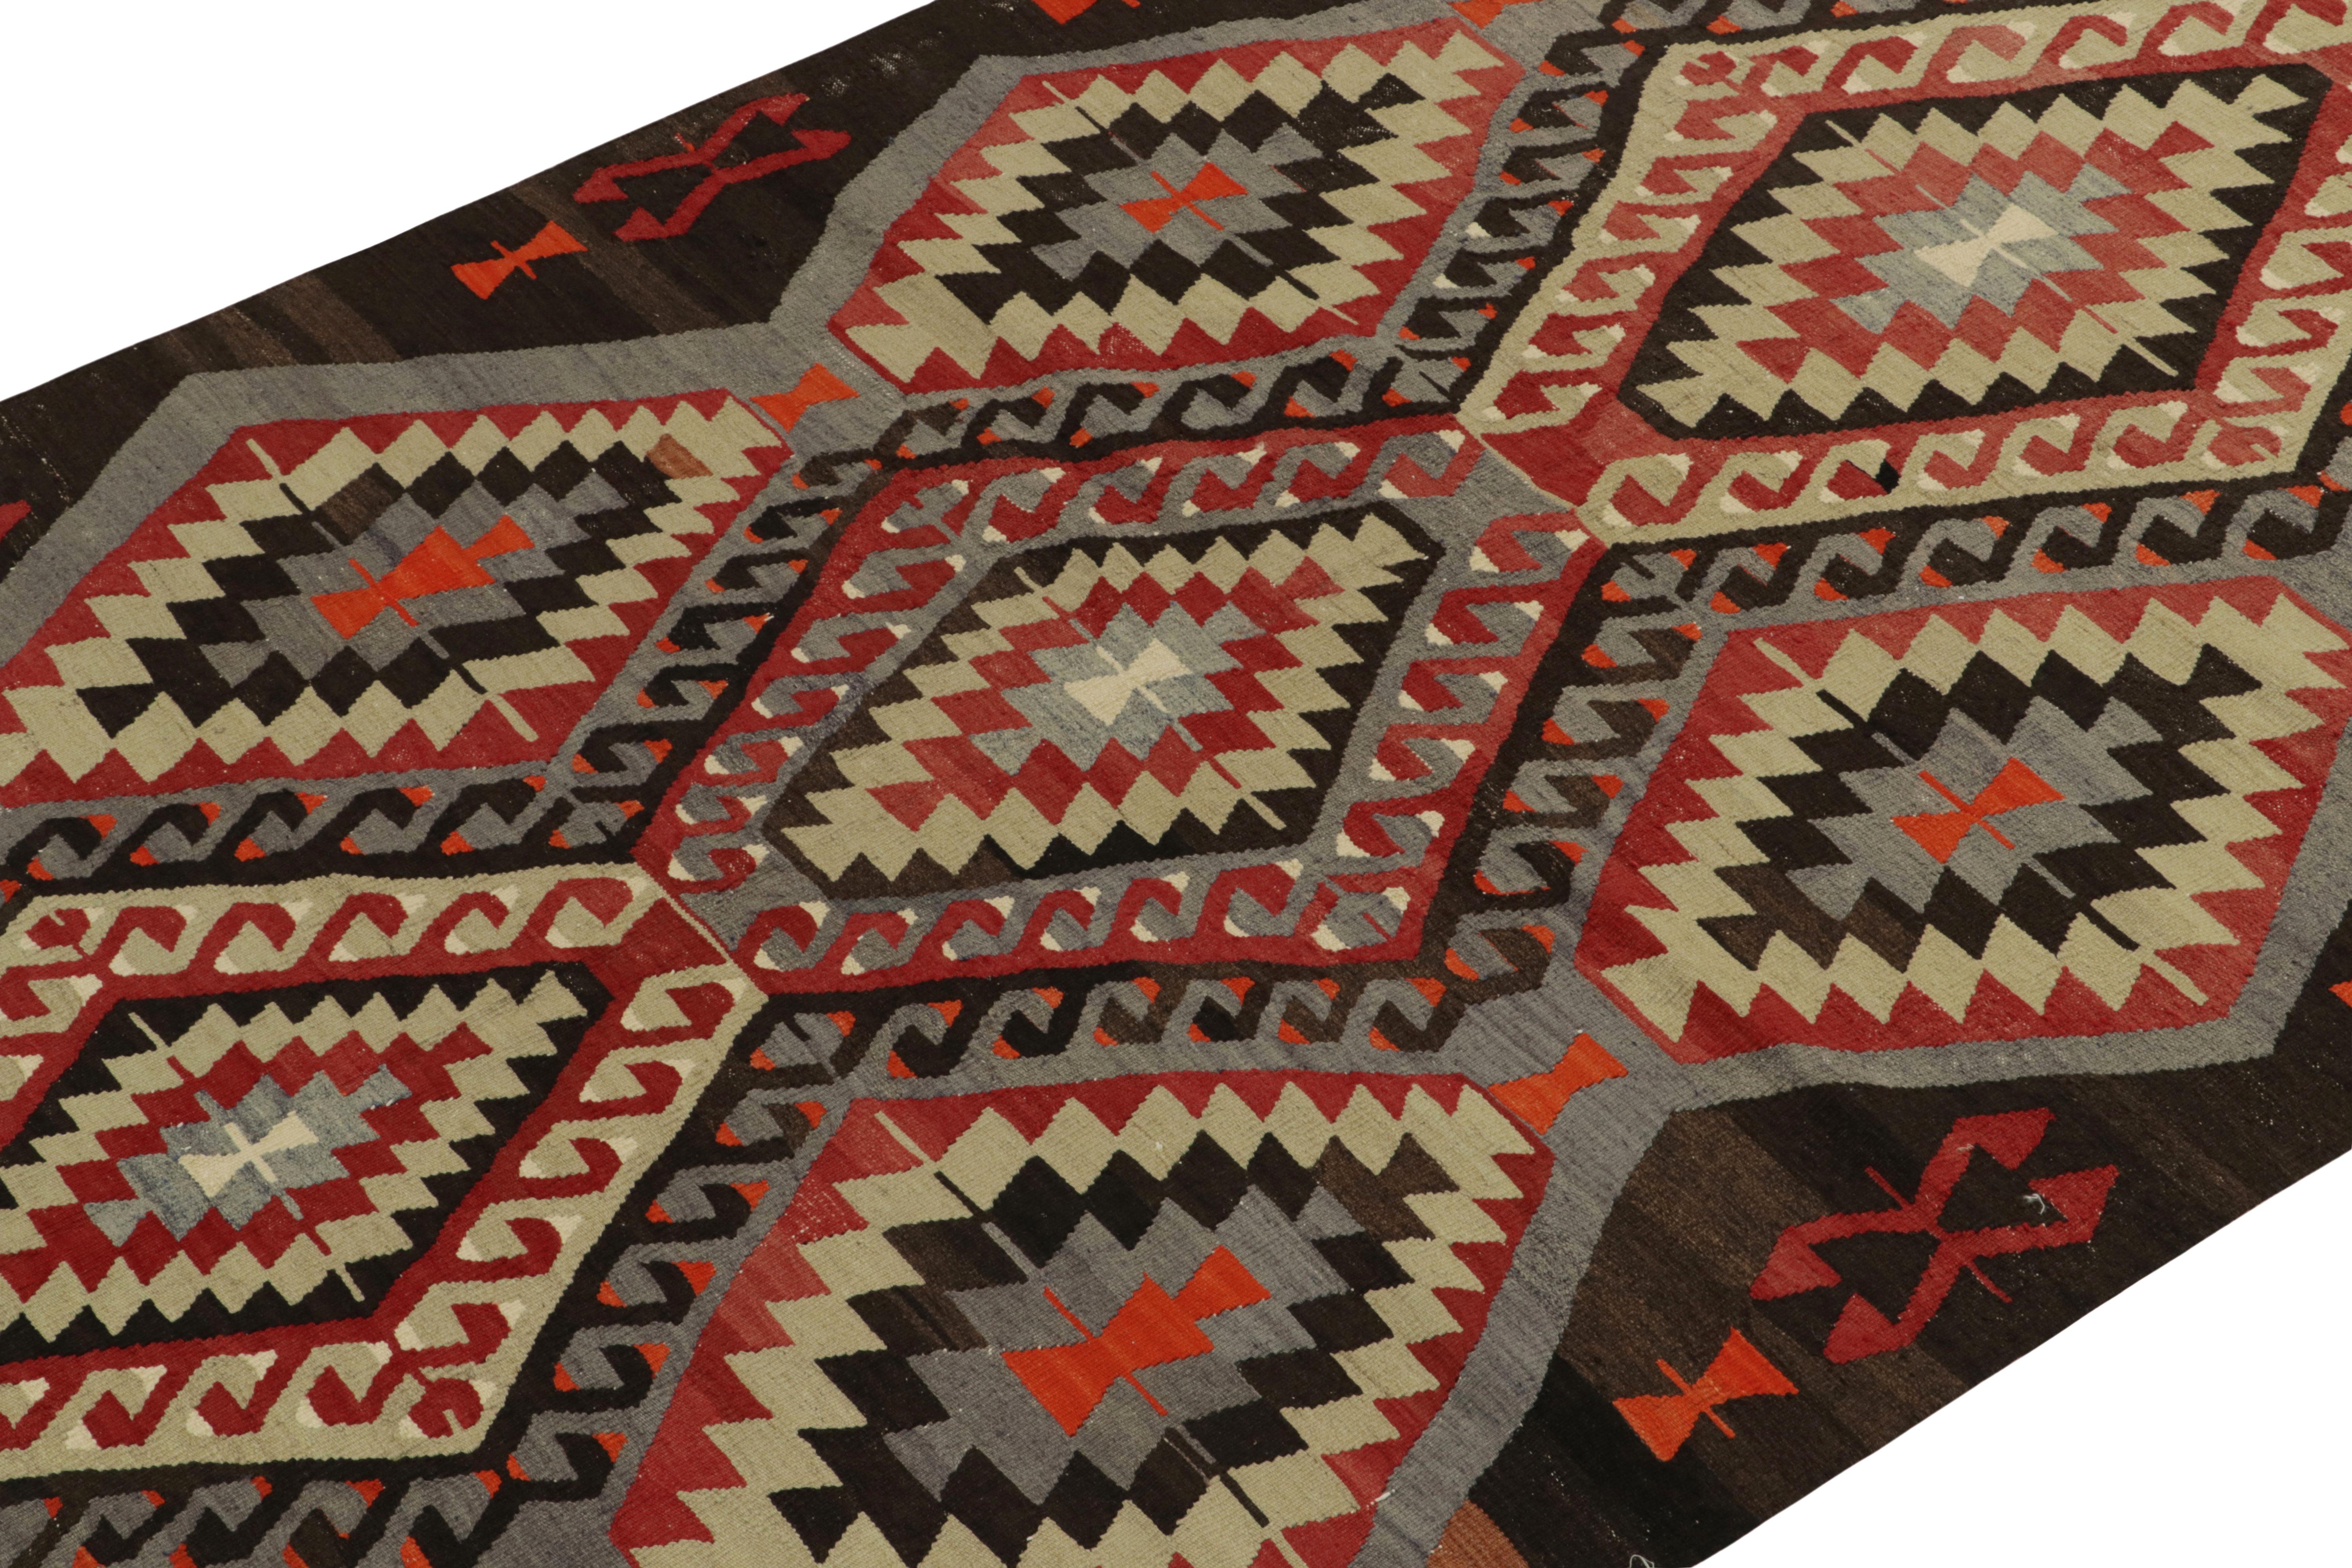 Hailing from Turkey circa 1940-1950, a mid-century kilim rug,  now joining Rug & Kilim’s vintage flat weave selections. The unusual graph revels in rare blue tones with red, white & deep brown rendering a unique presence for its era. Connoisseurs